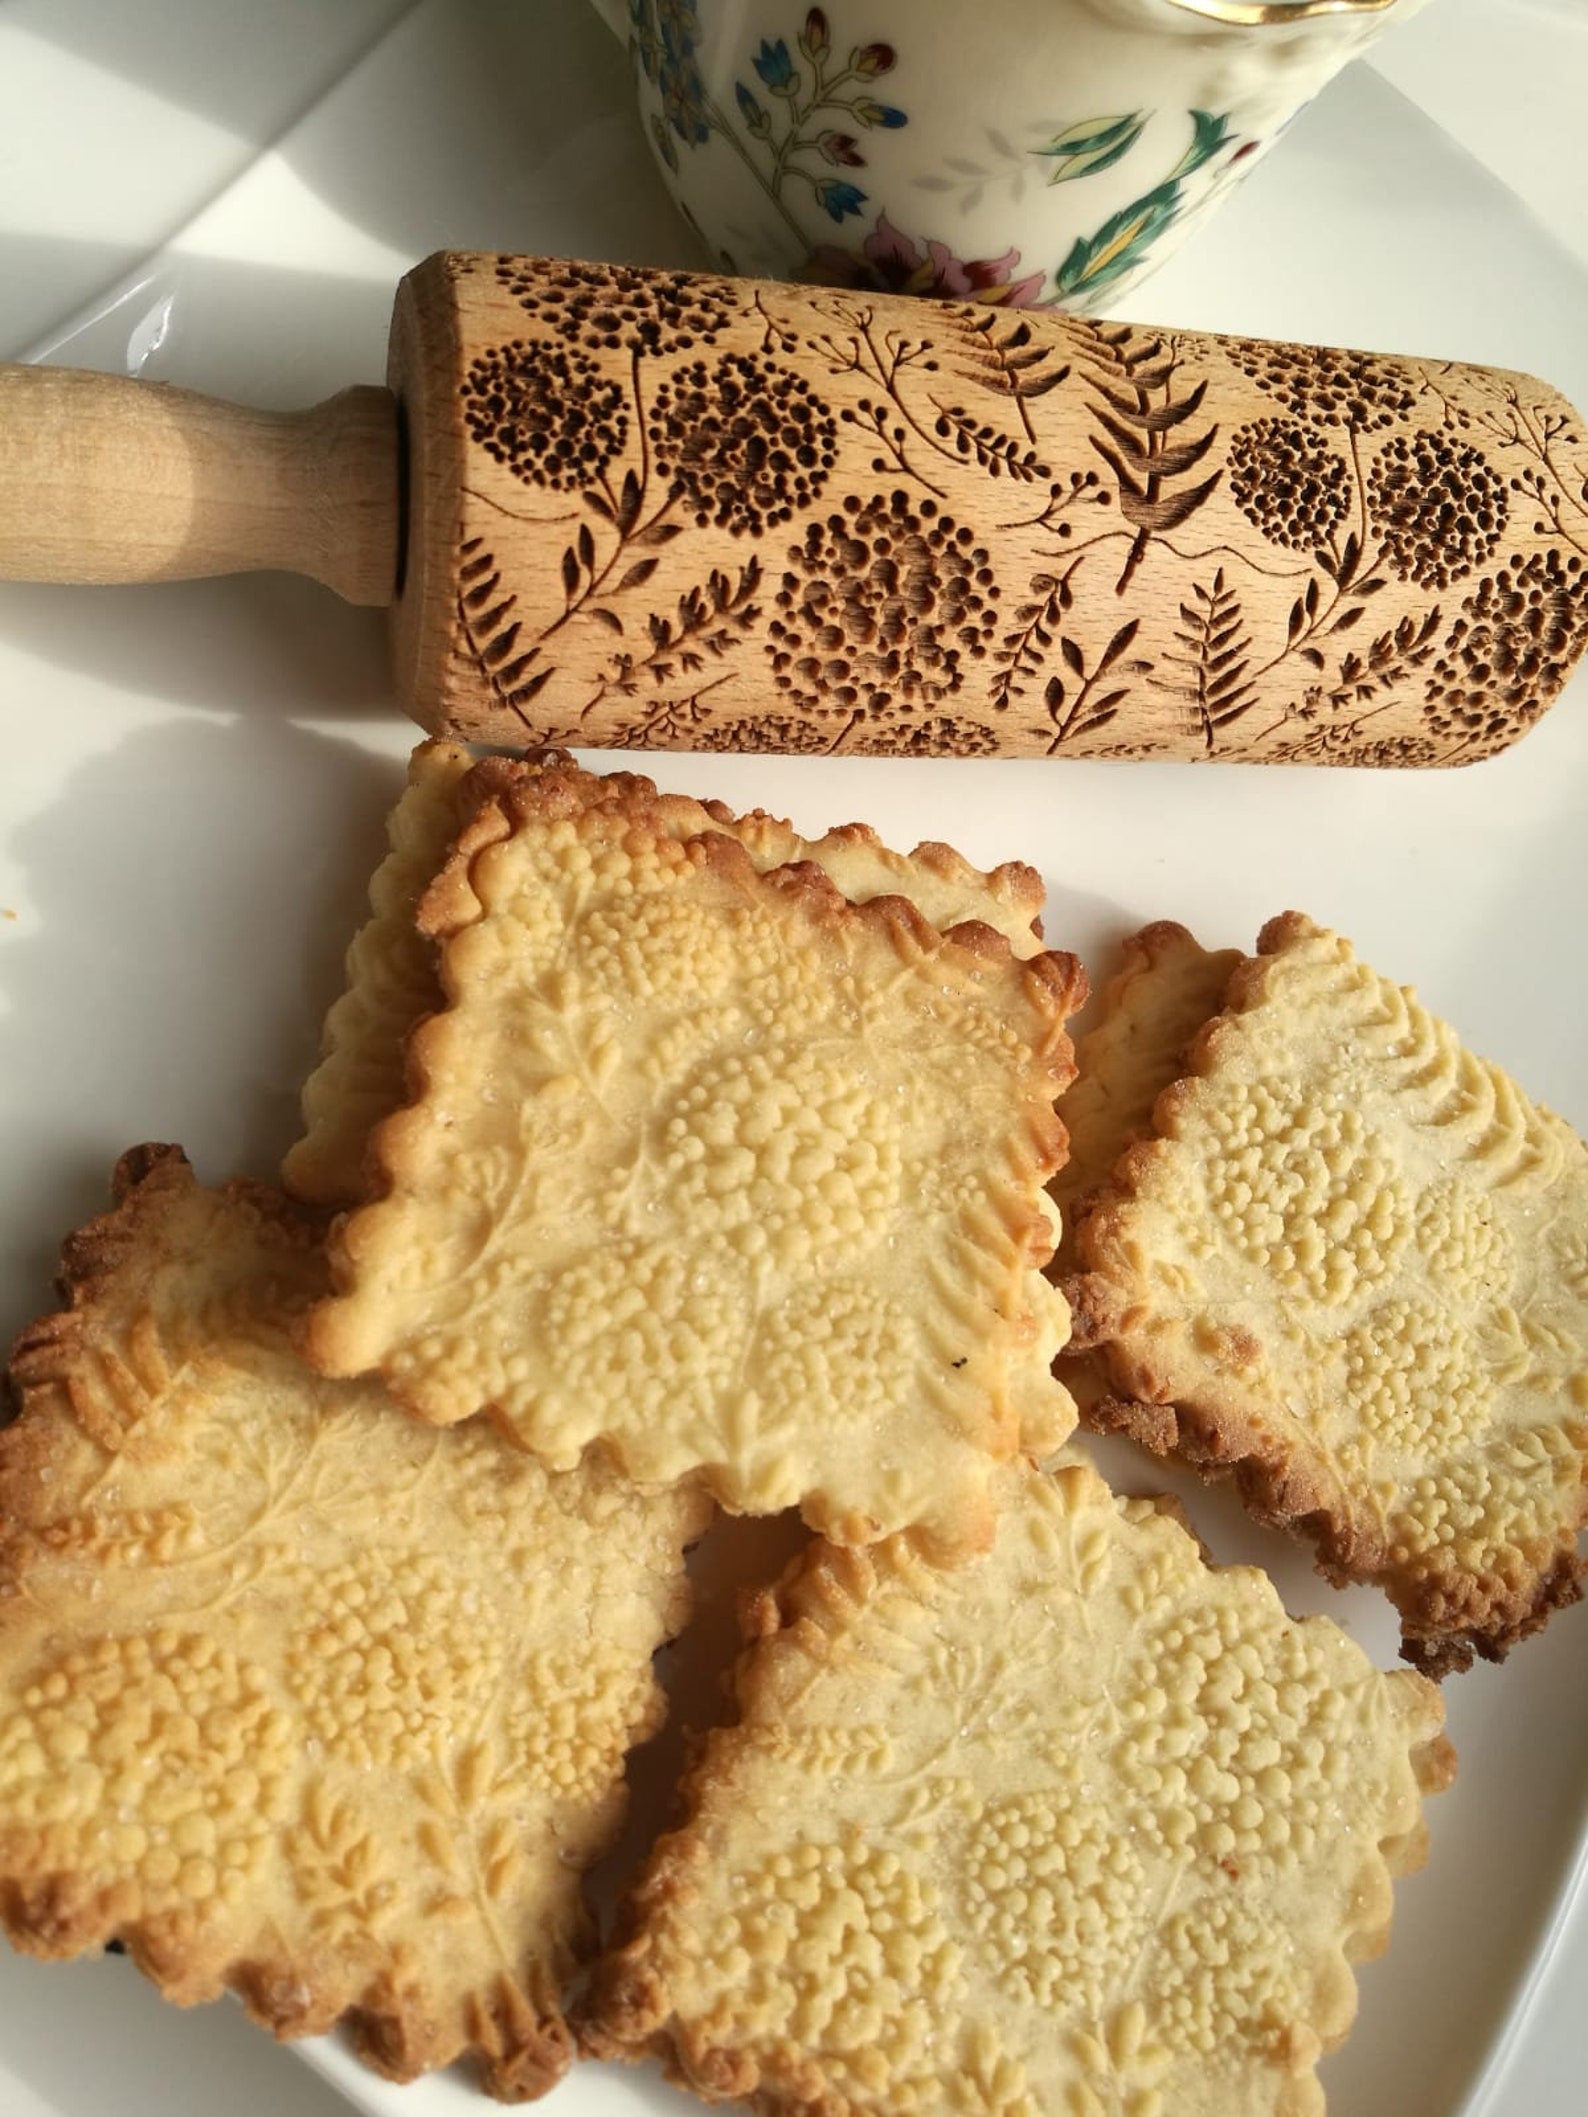 dandelion rolling pin with patterned shortbread cookies